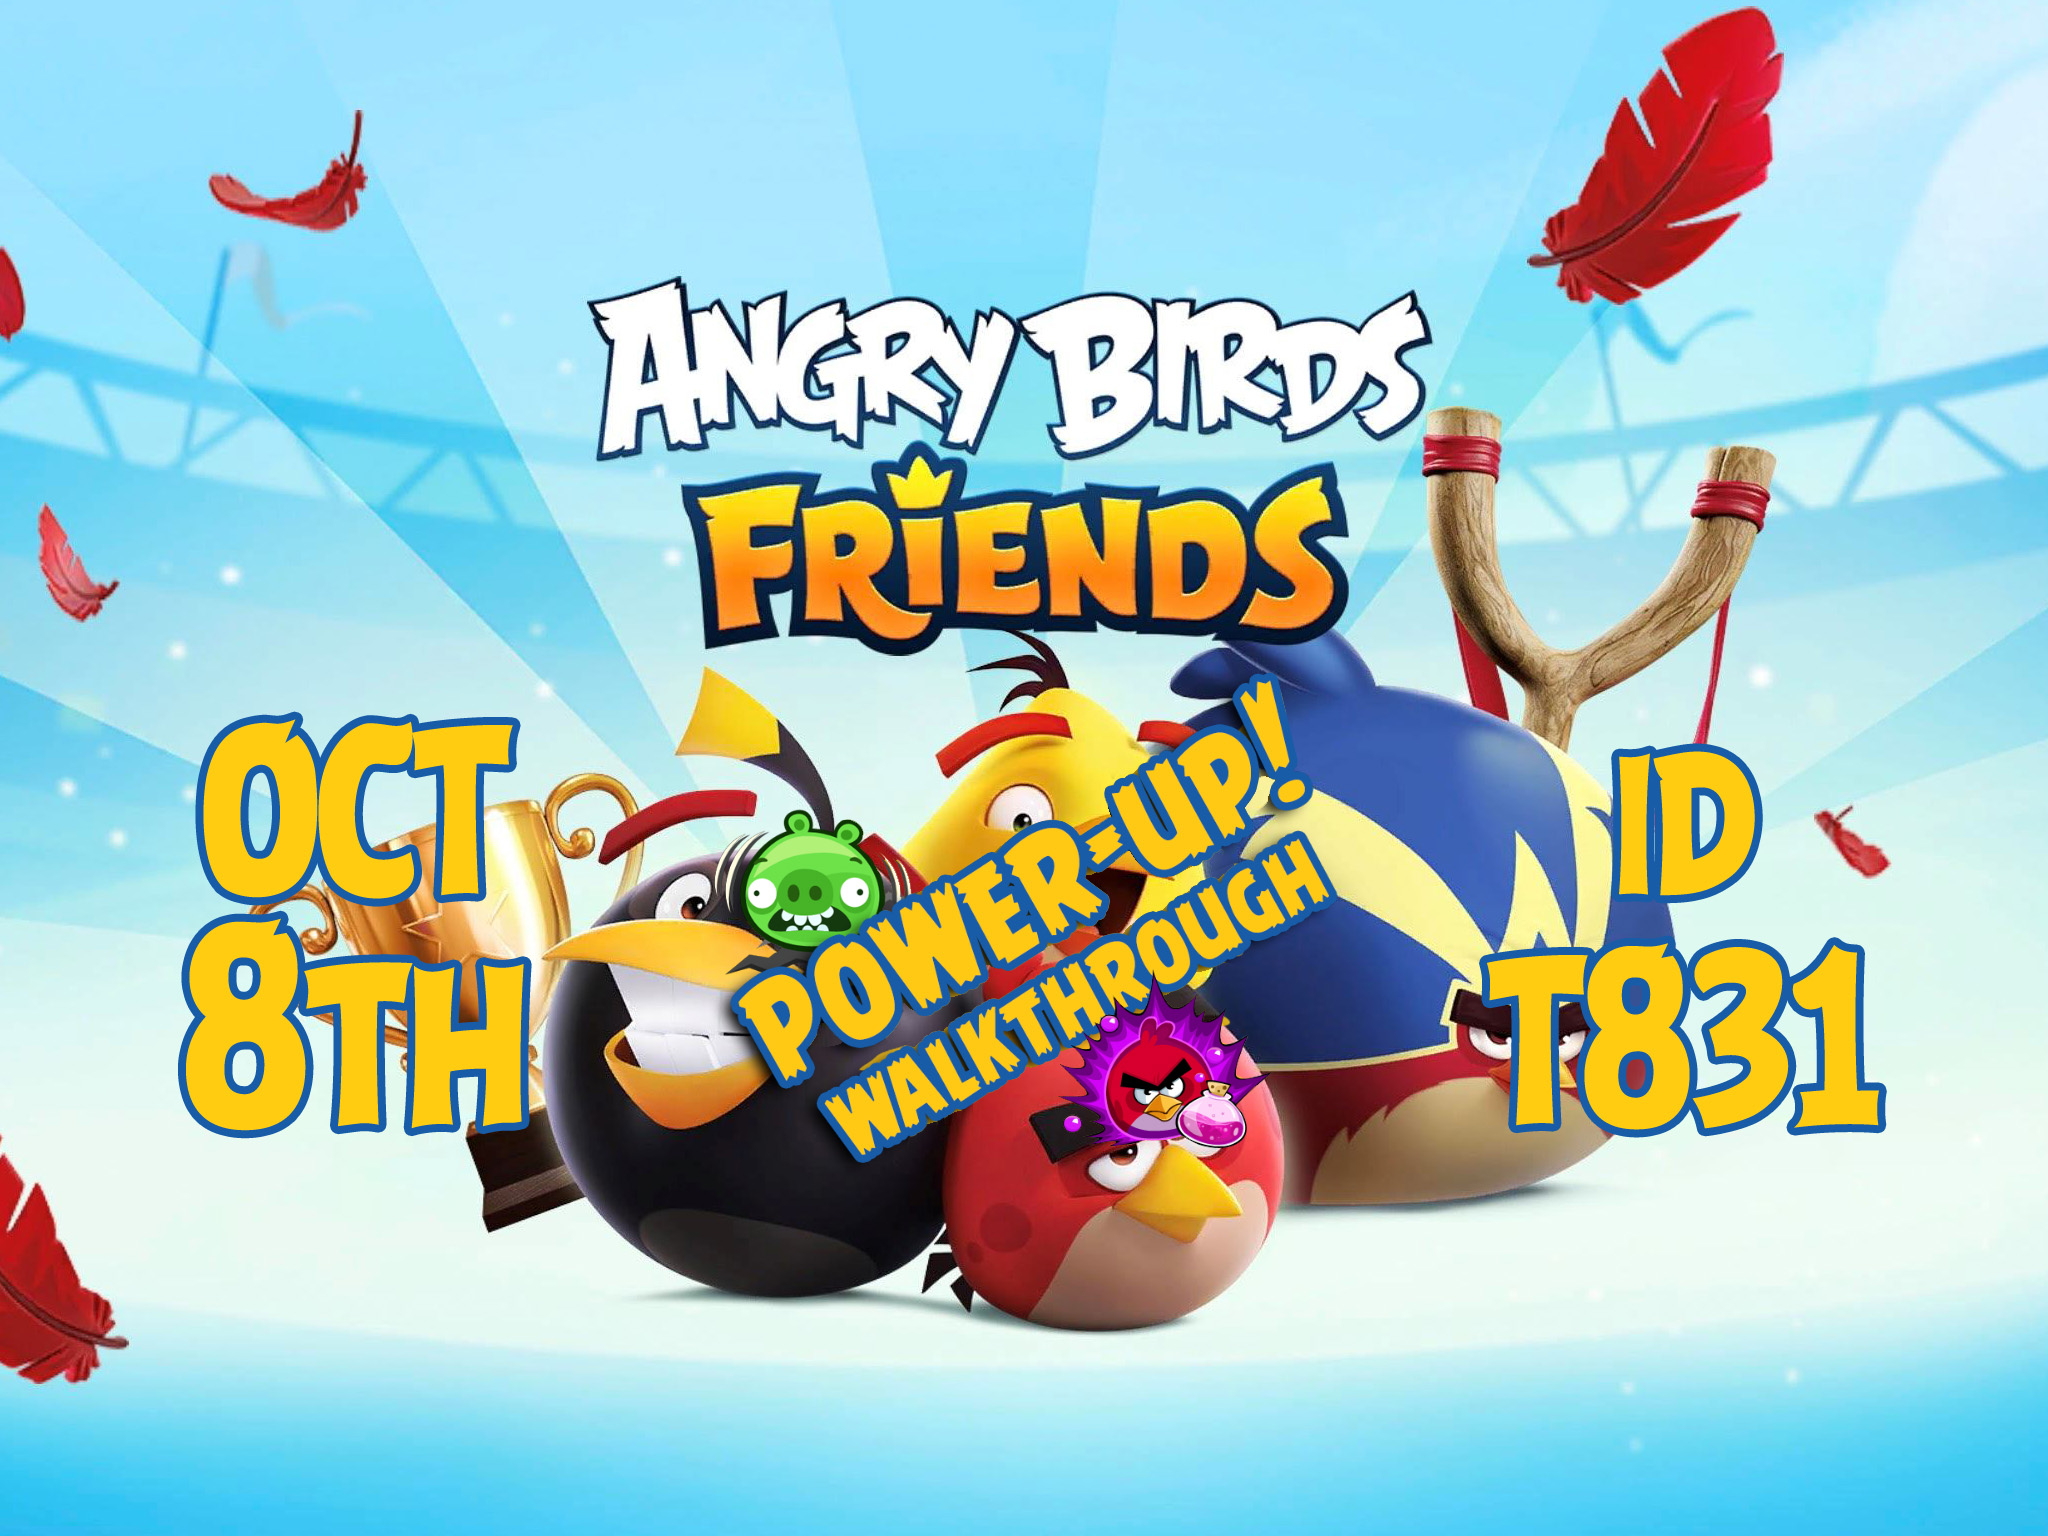 Angry-Birds-Friends-Tournament-T831-Feature-Image-PU